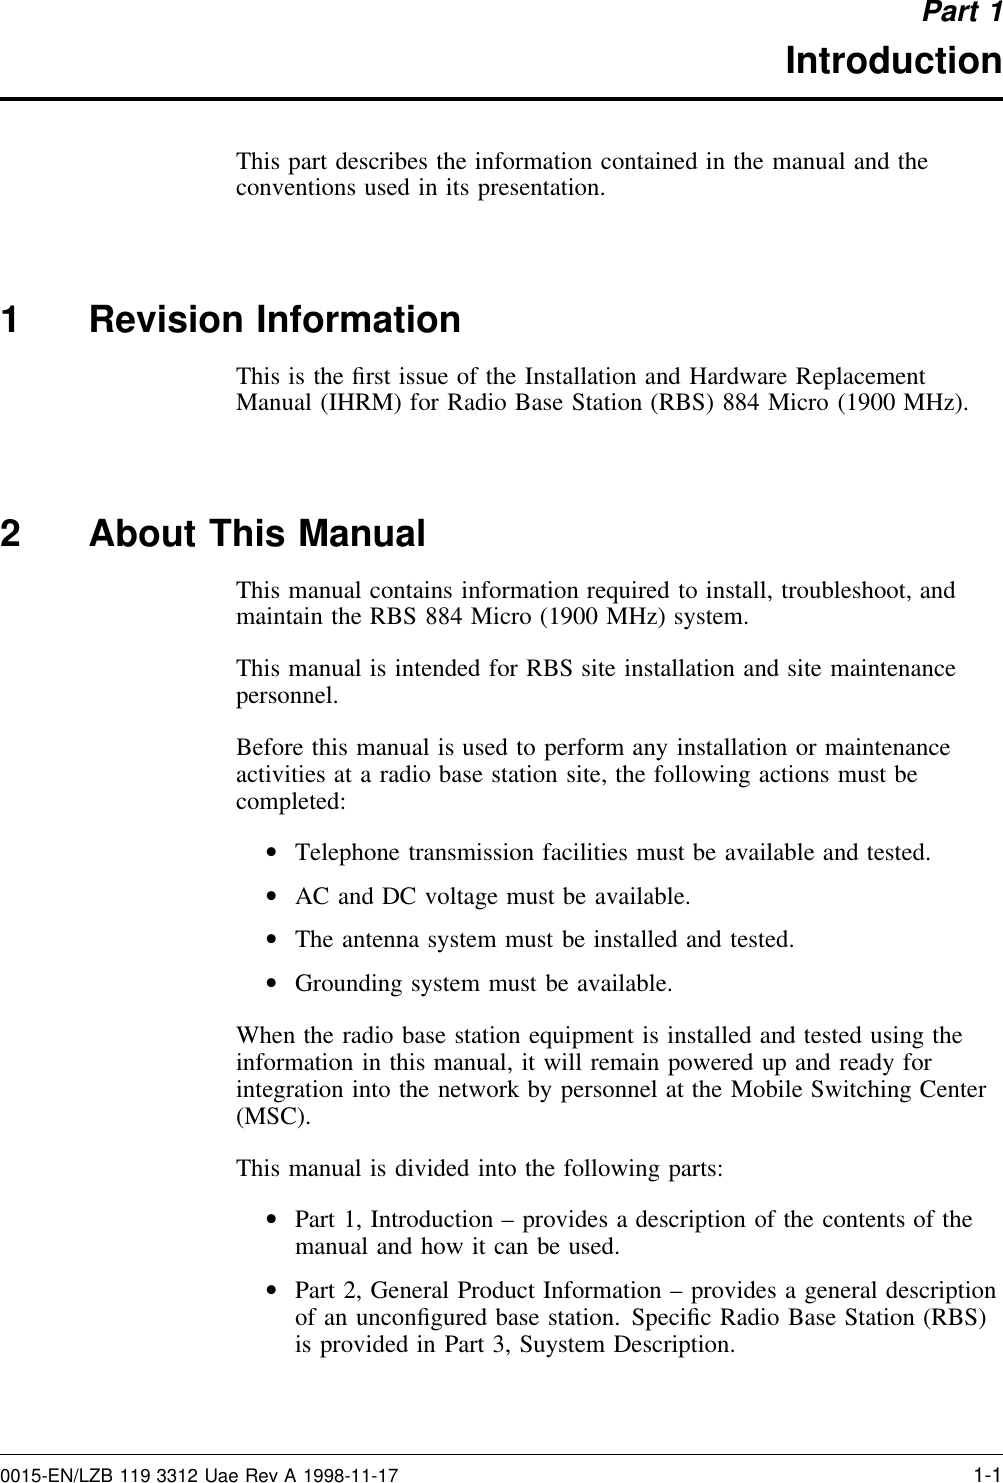 Part 1IntroductionThis part describes the information contained in the manual and theconventions used in its presentation.1 Revision InformationThis is the ﬁrst issue of the Installation and Hardware ReplacementManual (IHRM) for Radio Base Station (RBS) 884 Micro (1900 MHz).2 About This ManualThis manual contains information required to install, troubleshoot, andmaintain the RBS 884 Micro (1900 MHz) system.This manual is intended for RBS site installation and site maintenancepersonnel.Before this manual is used to perform any installation or maintenanceactivities at a radio base station site, the following actions must becompleted:•Telephone transmission facilities must be available and tested.•AC and DC voltage must be available.•The antenna system must be installed and tested.•Grounding system must be available.When the radio base station equipment is installed and tested using theinformation in this manual, it will remain powered up and ready forintegration into the network by personnel at the Mobile Switching Center(MSC).This manual is divided into the following parts:•Part 1, Introduction – provides a description of the contents of themanual and how it can be used.•Part 2, General Product Information – provides a general descriptionof an unconﬁgured base station. Speciﬁc Radio Base Station (RBS)is provided in Part 3, Suystem Description.0015-EN/LZB 119 3312 Uae Rev A 1998-11-17 1-1